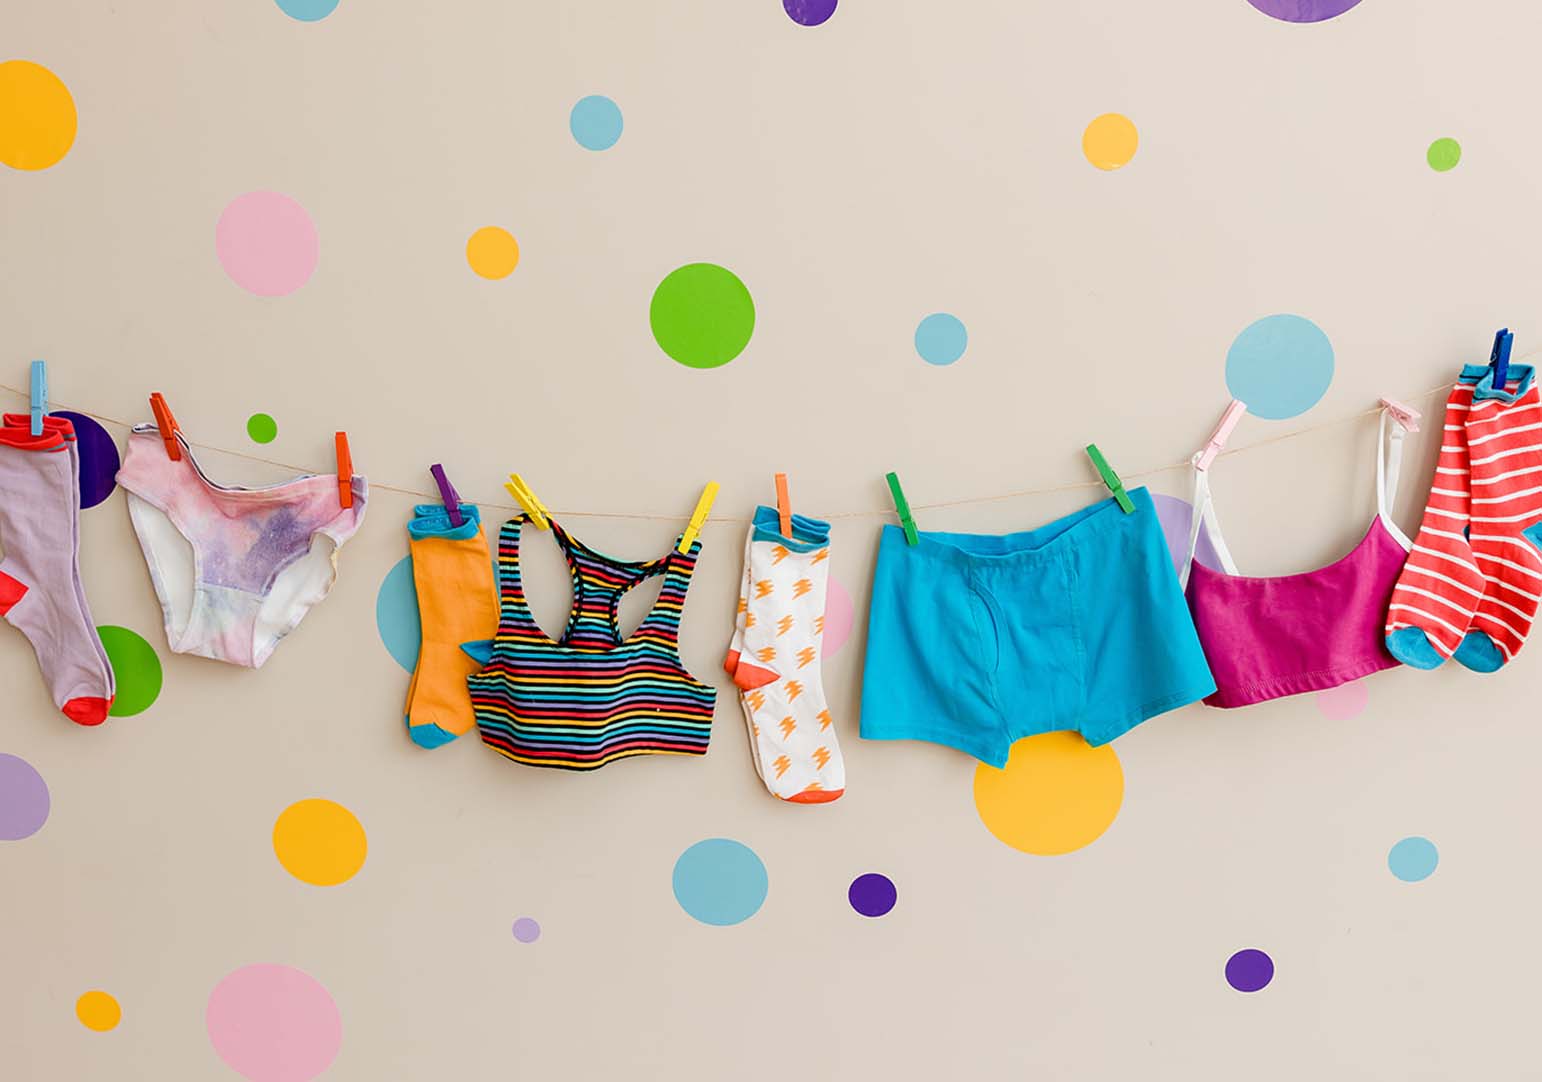 Underwear & Socks, New Collection, Exclusive prints, Children's fashion  from 0 to 11 years old